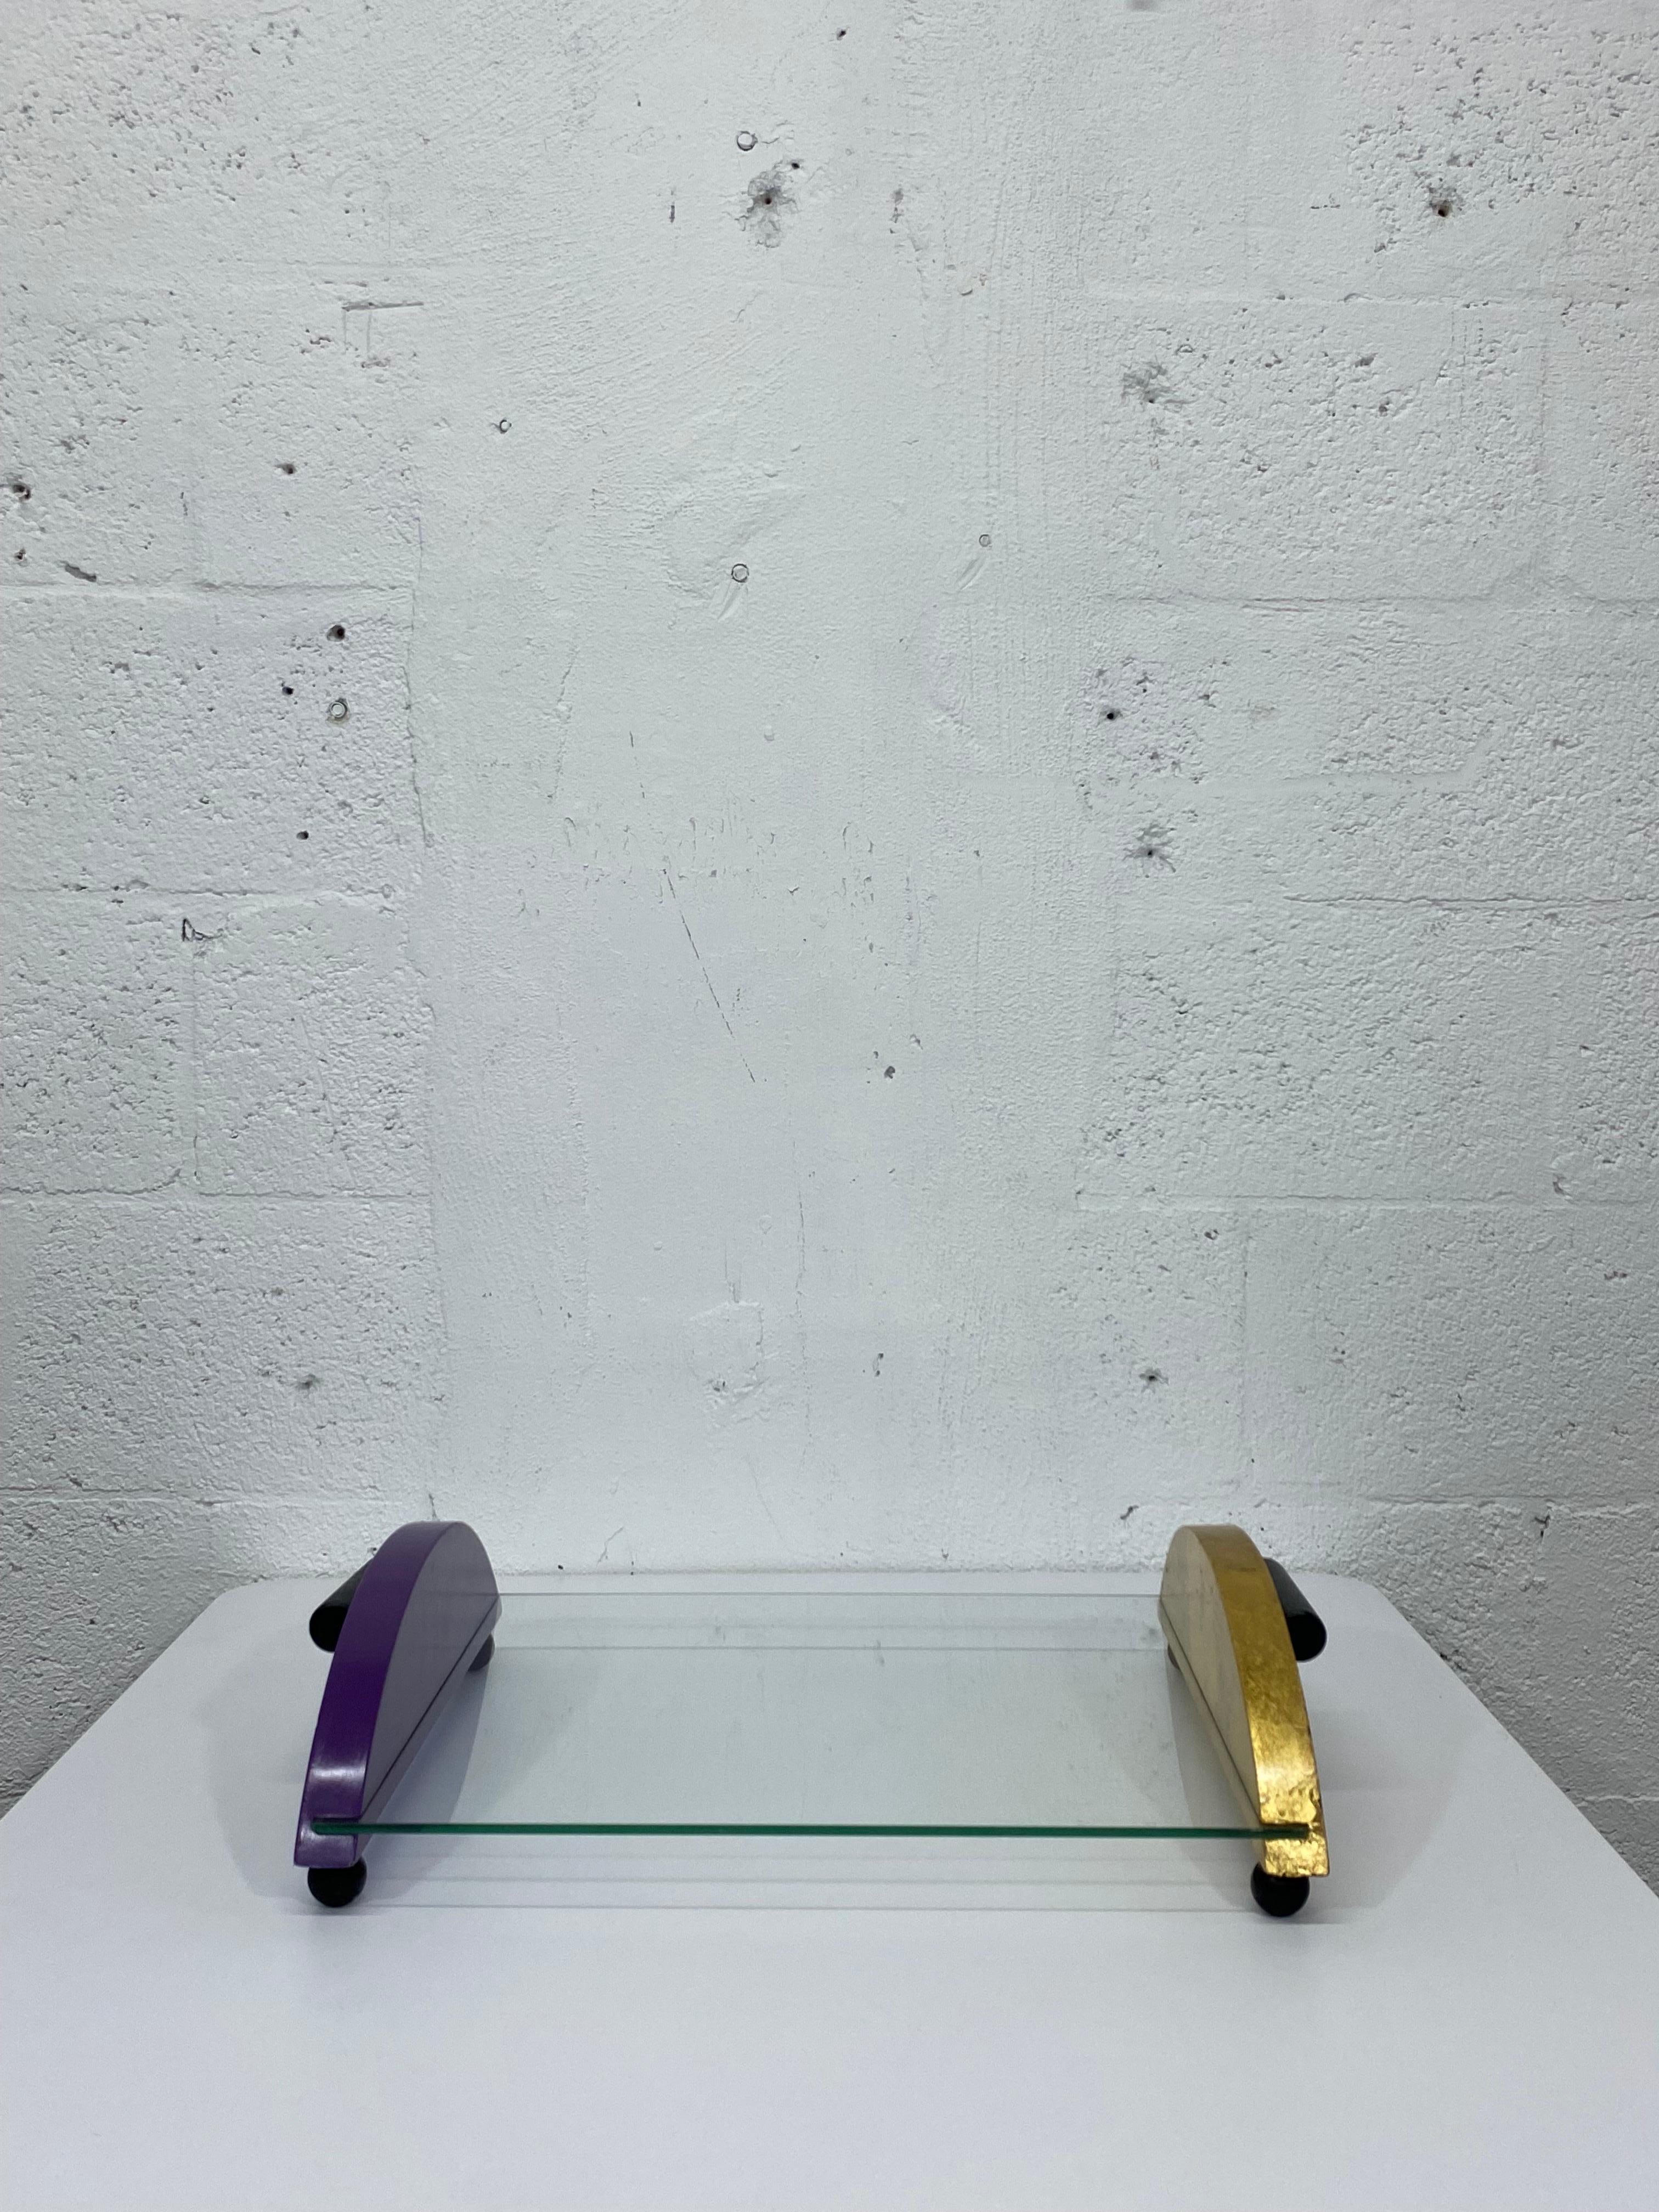 Postmodern design glass and wood serving tray with handles by Thor, 1996. One side is gold leaf and the other is purple.